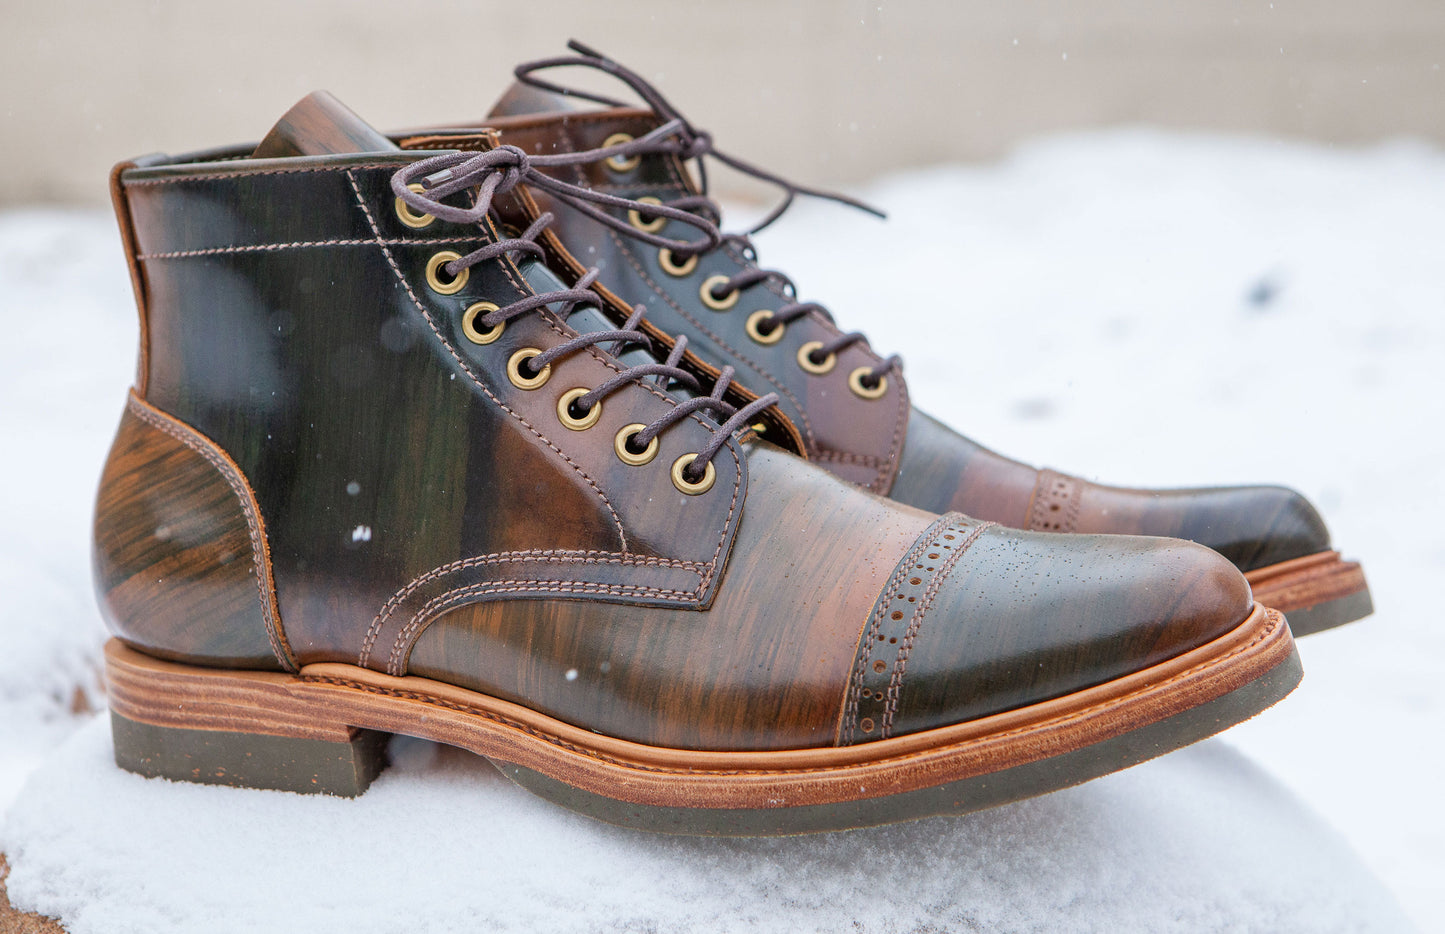 Pigeon Tree X Santalum Collab No. 4 - The Hand Marbled Green Vegetable Tanned Boot